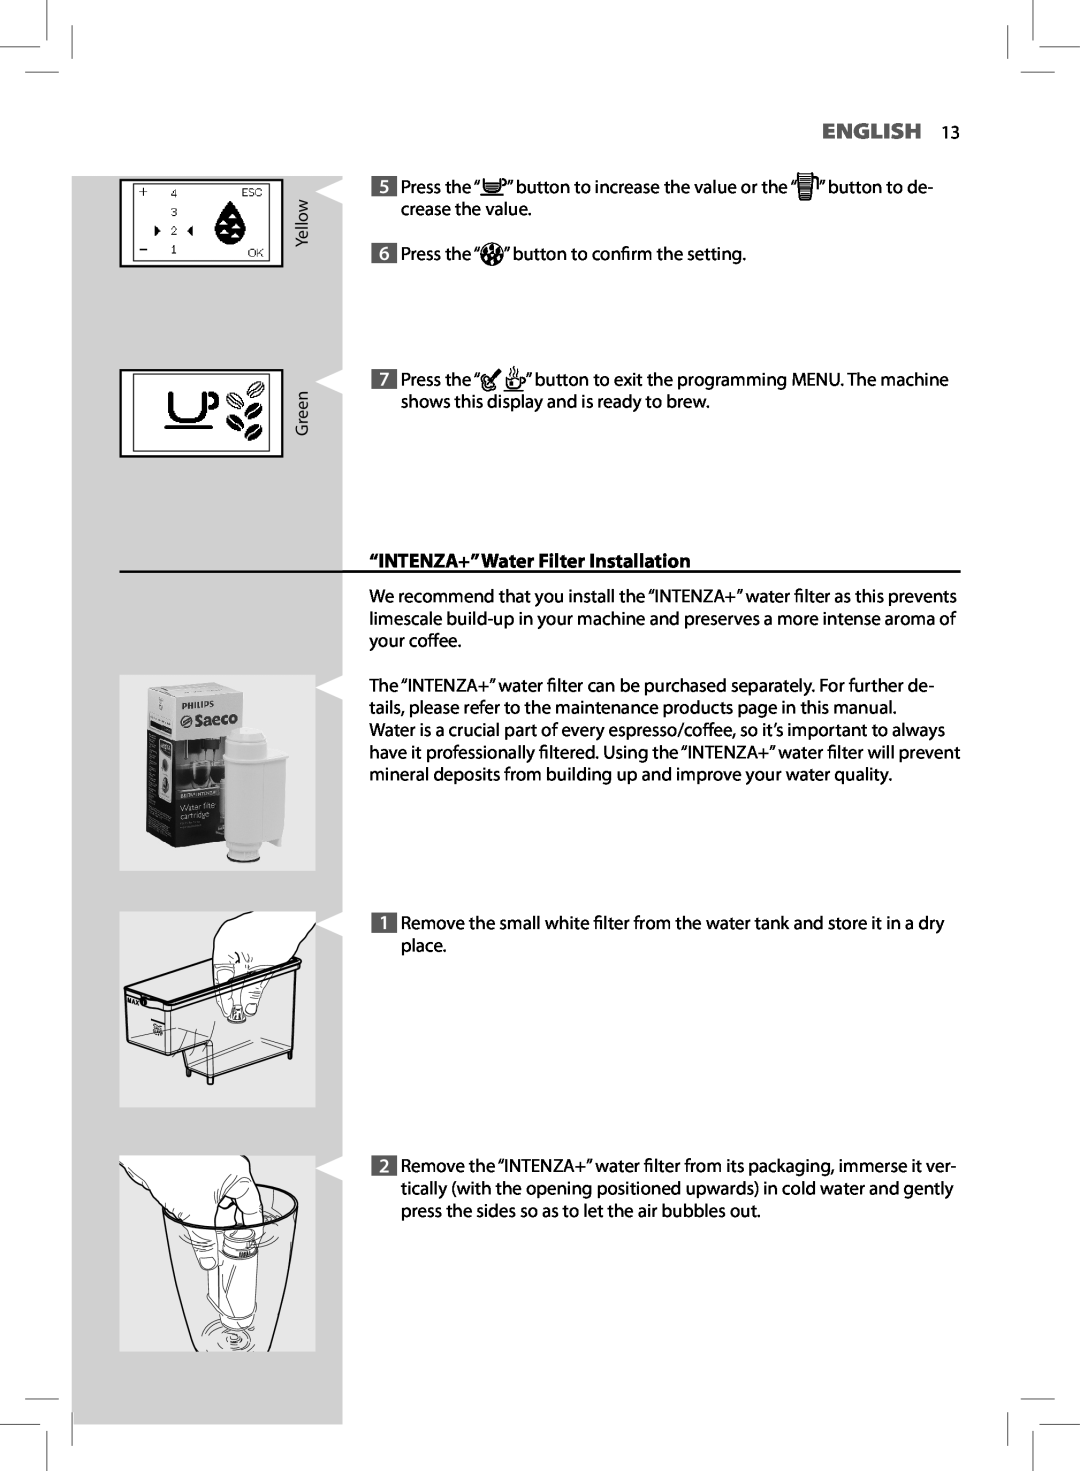 Saeco Coffee Makers HD8775 user manual English, “INTENZA+”Water Filter Installation 